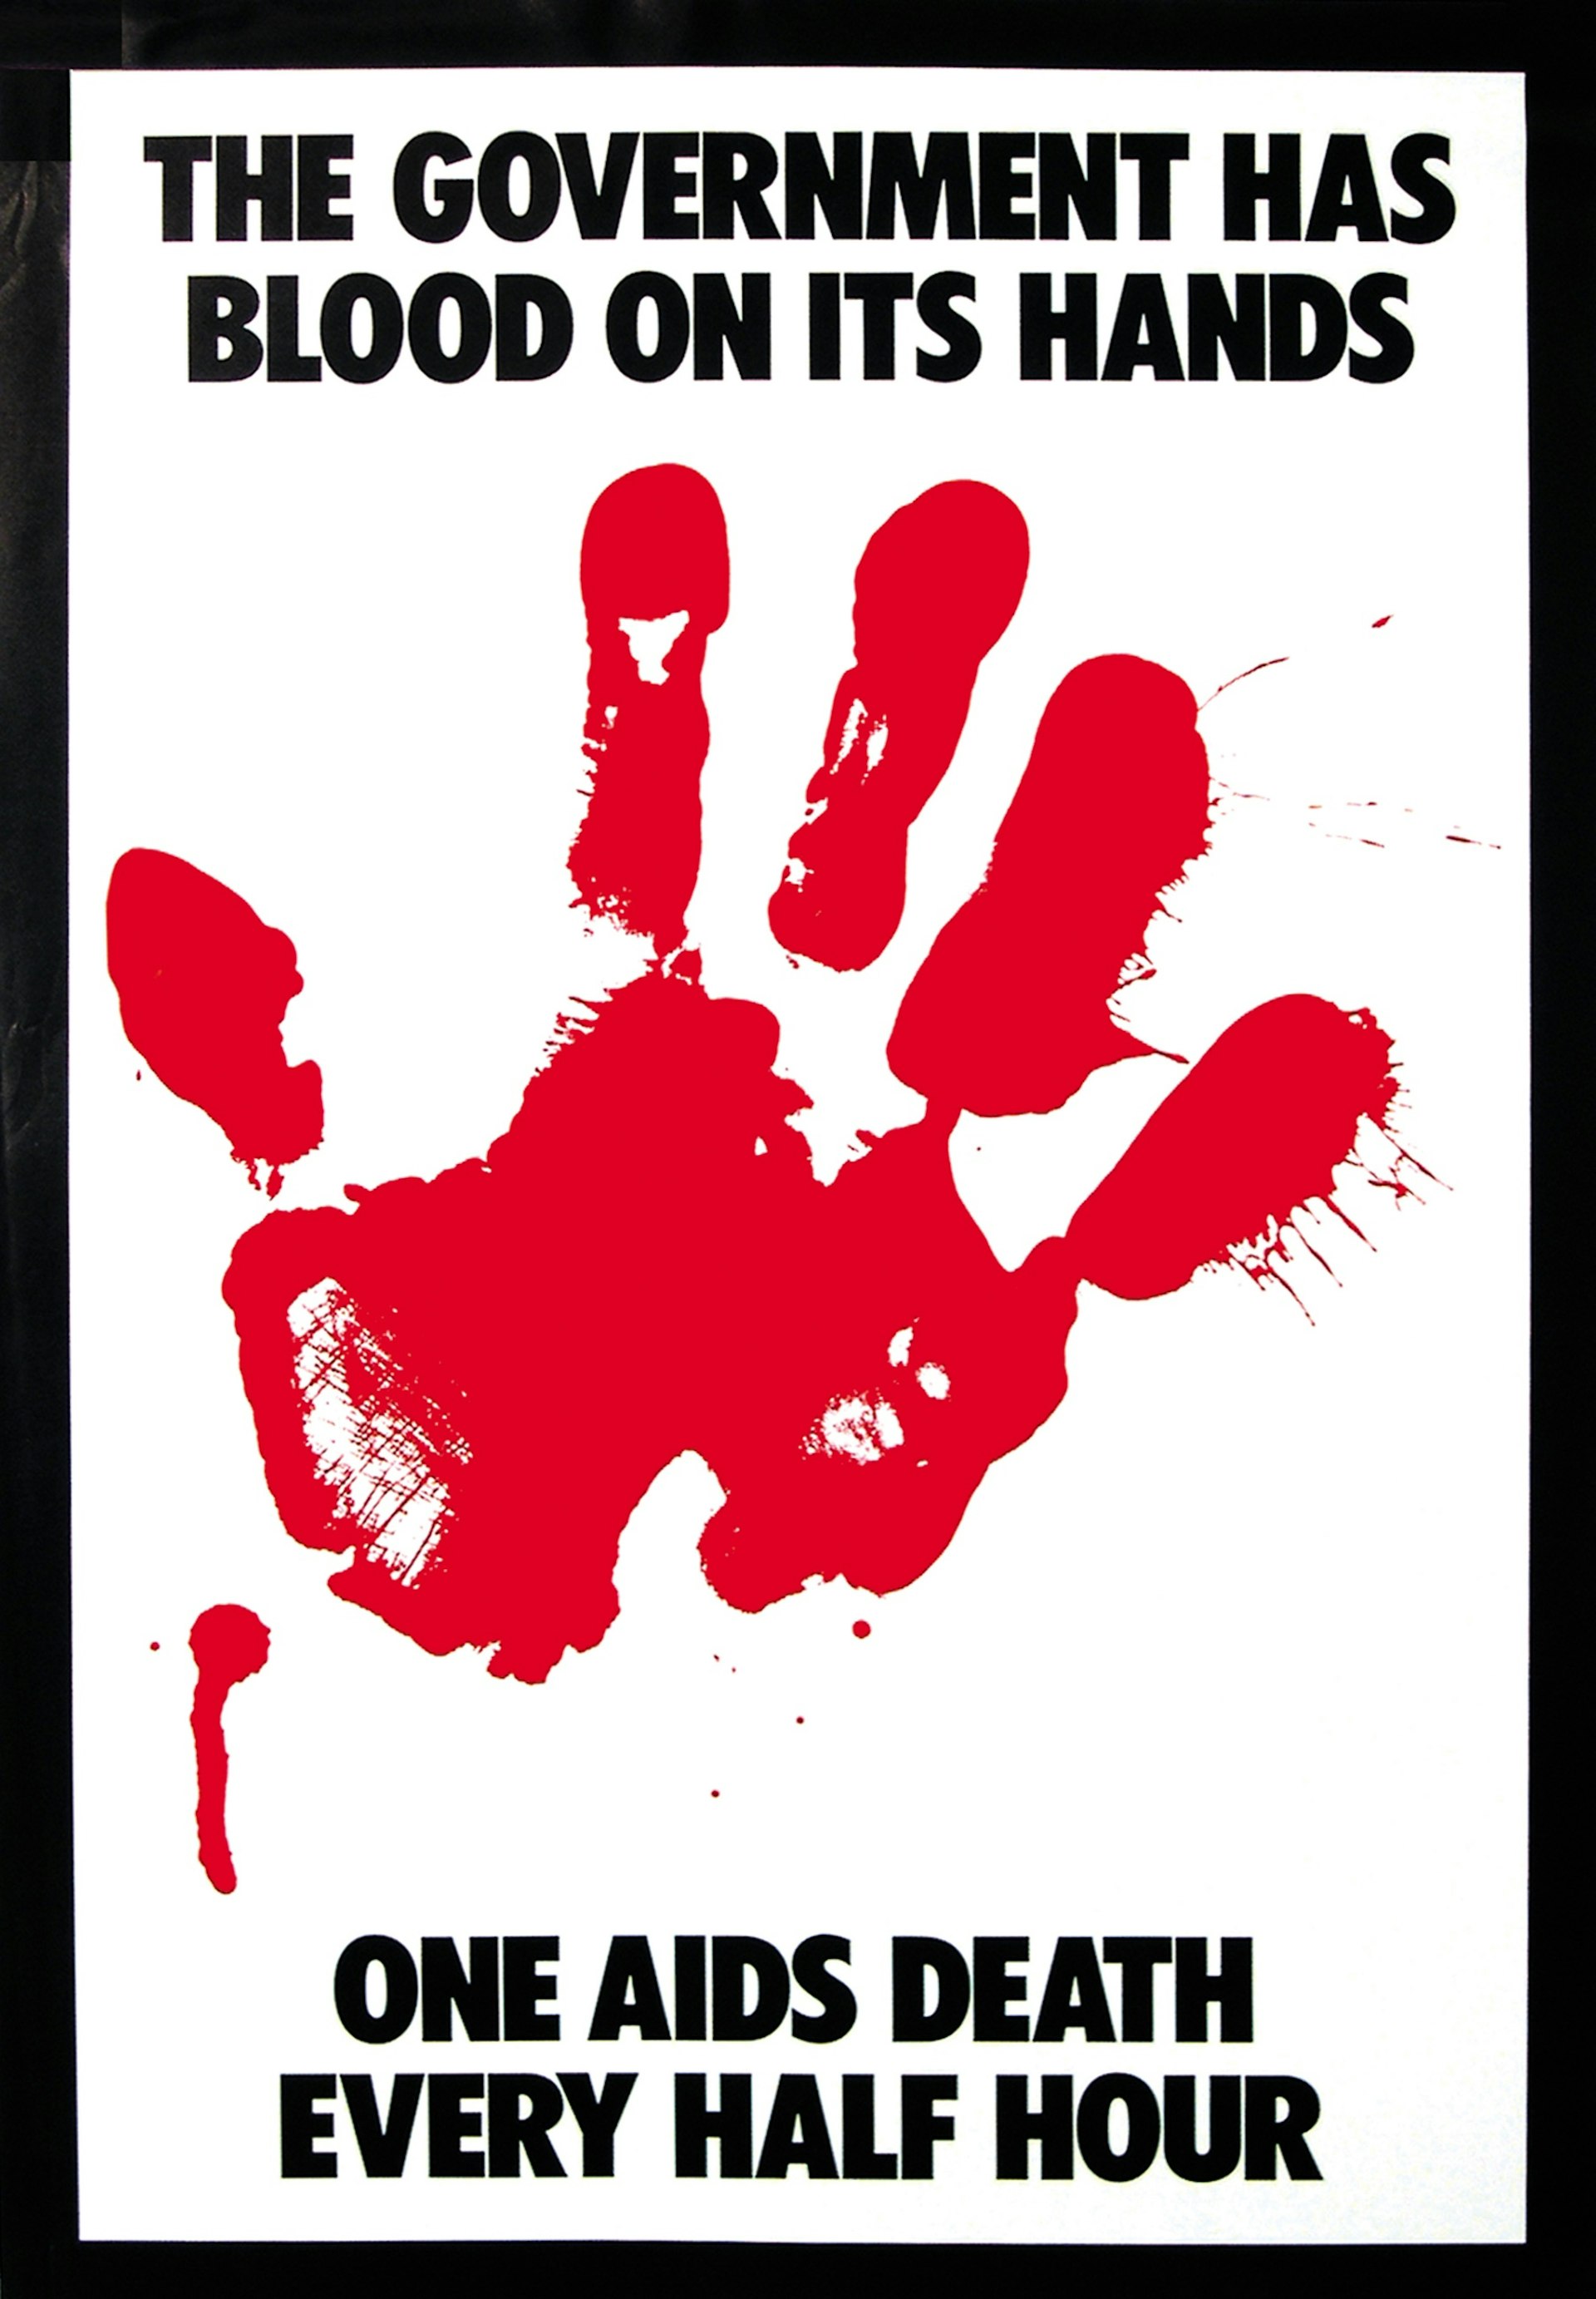 The Government Has Blood On Its Hands, Gran Fury, 1988, poster, offset lithography, ACT UP, FDA Action.